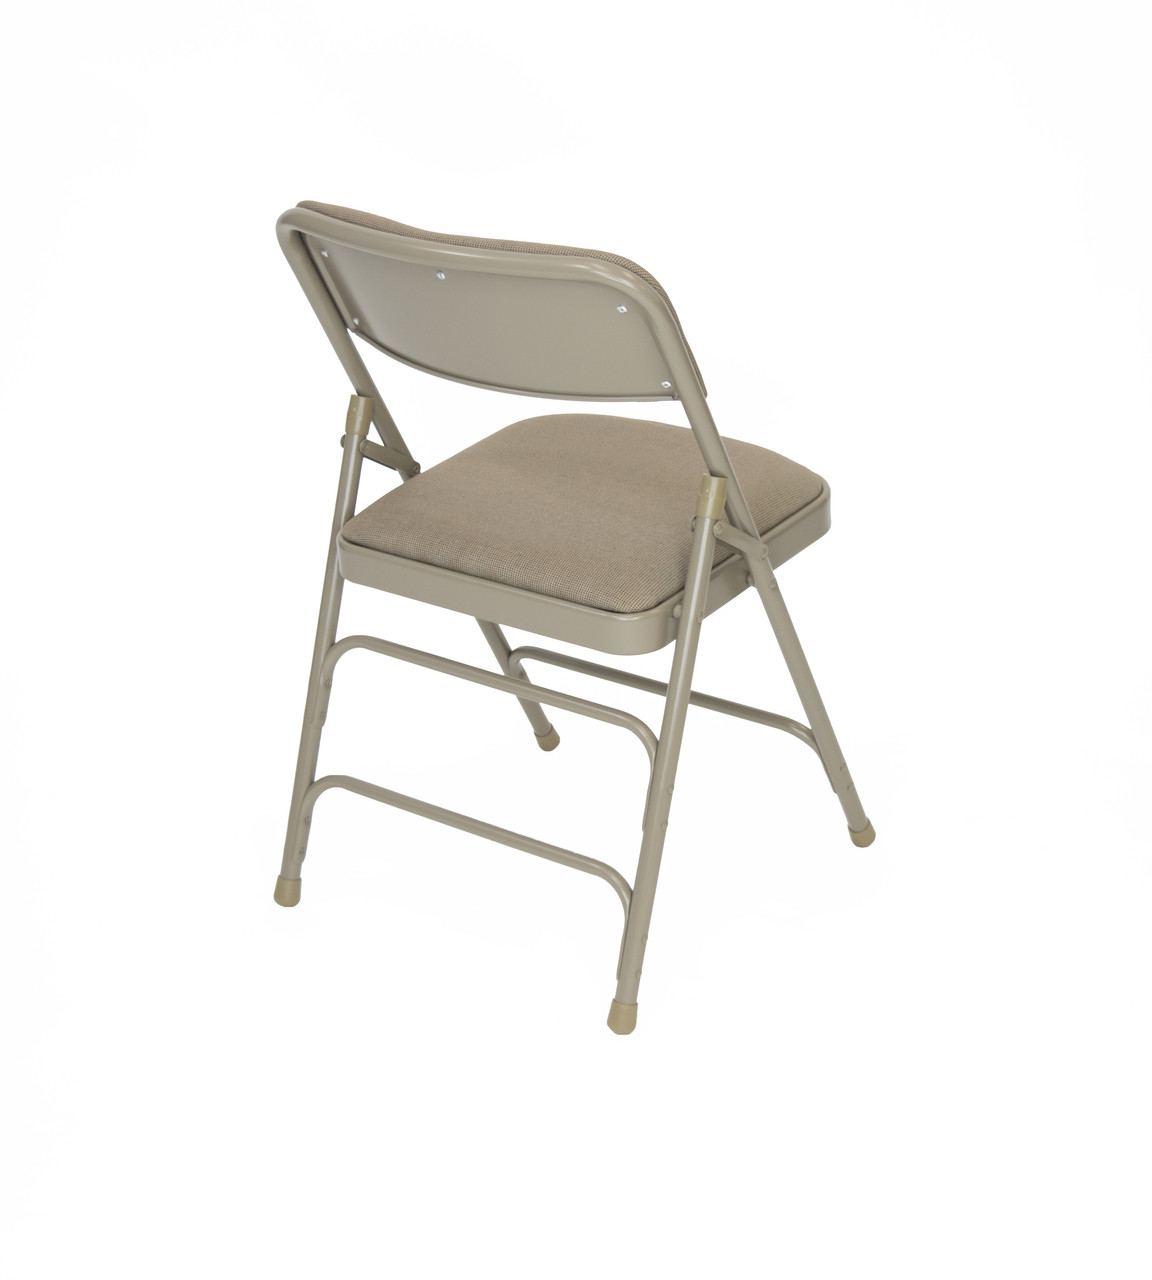 XL Series Commercial Fabric Padded Folding Chair, Triple Cross Bracing, Quad Hinging, 300 lb Tested, 4 Pack (Beige)